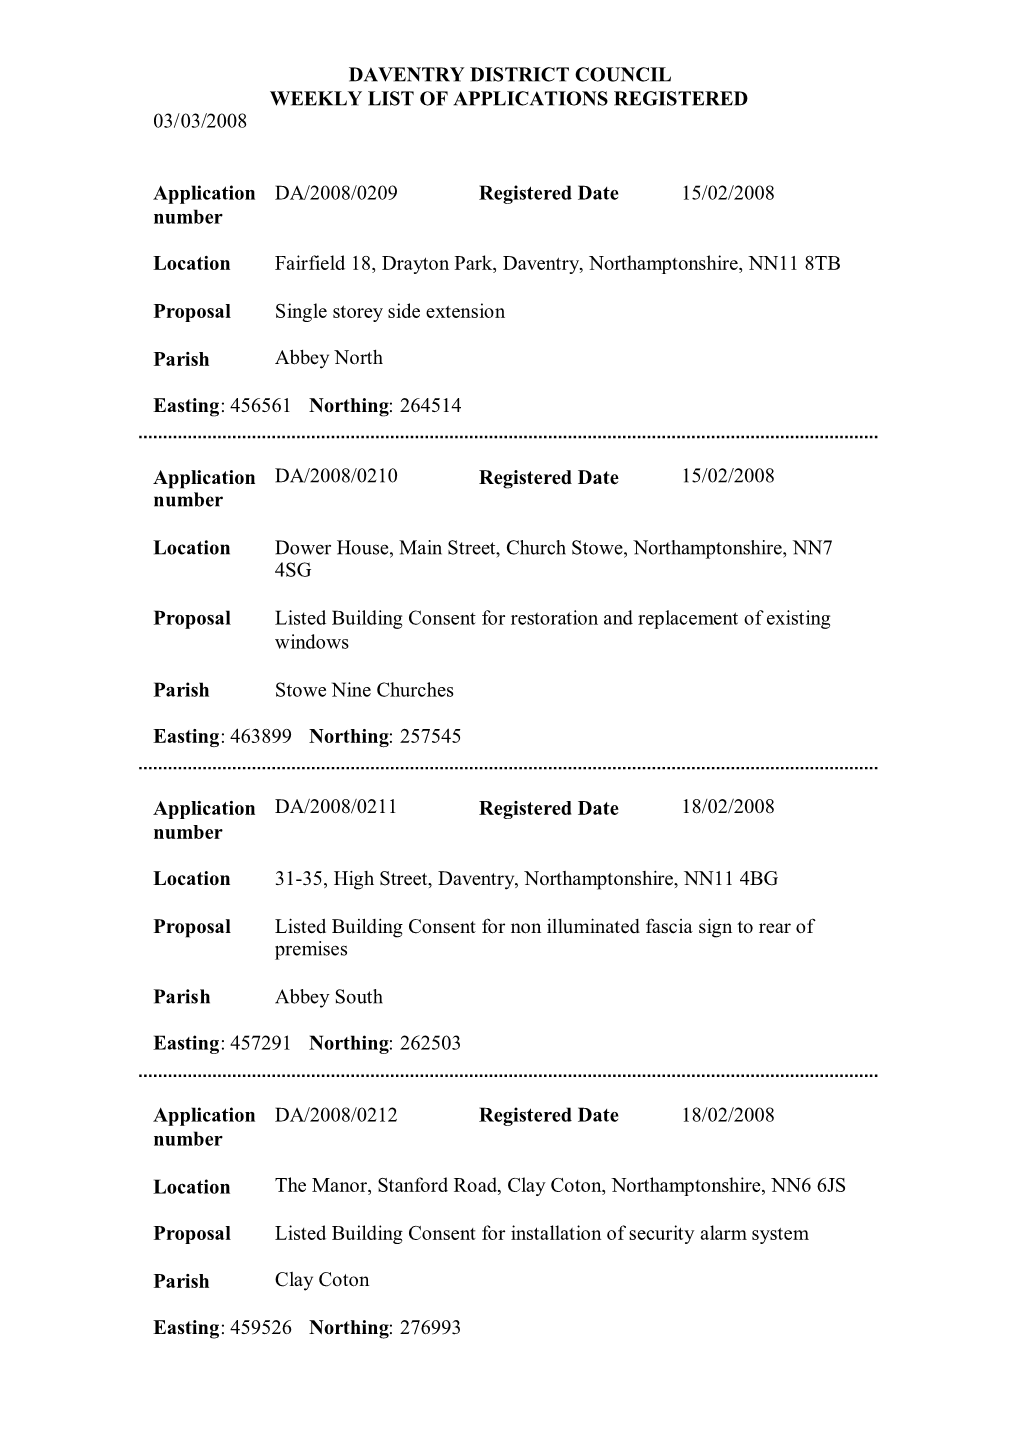 Daventry District Council Weekly List of Applications Registered 03/03/2008